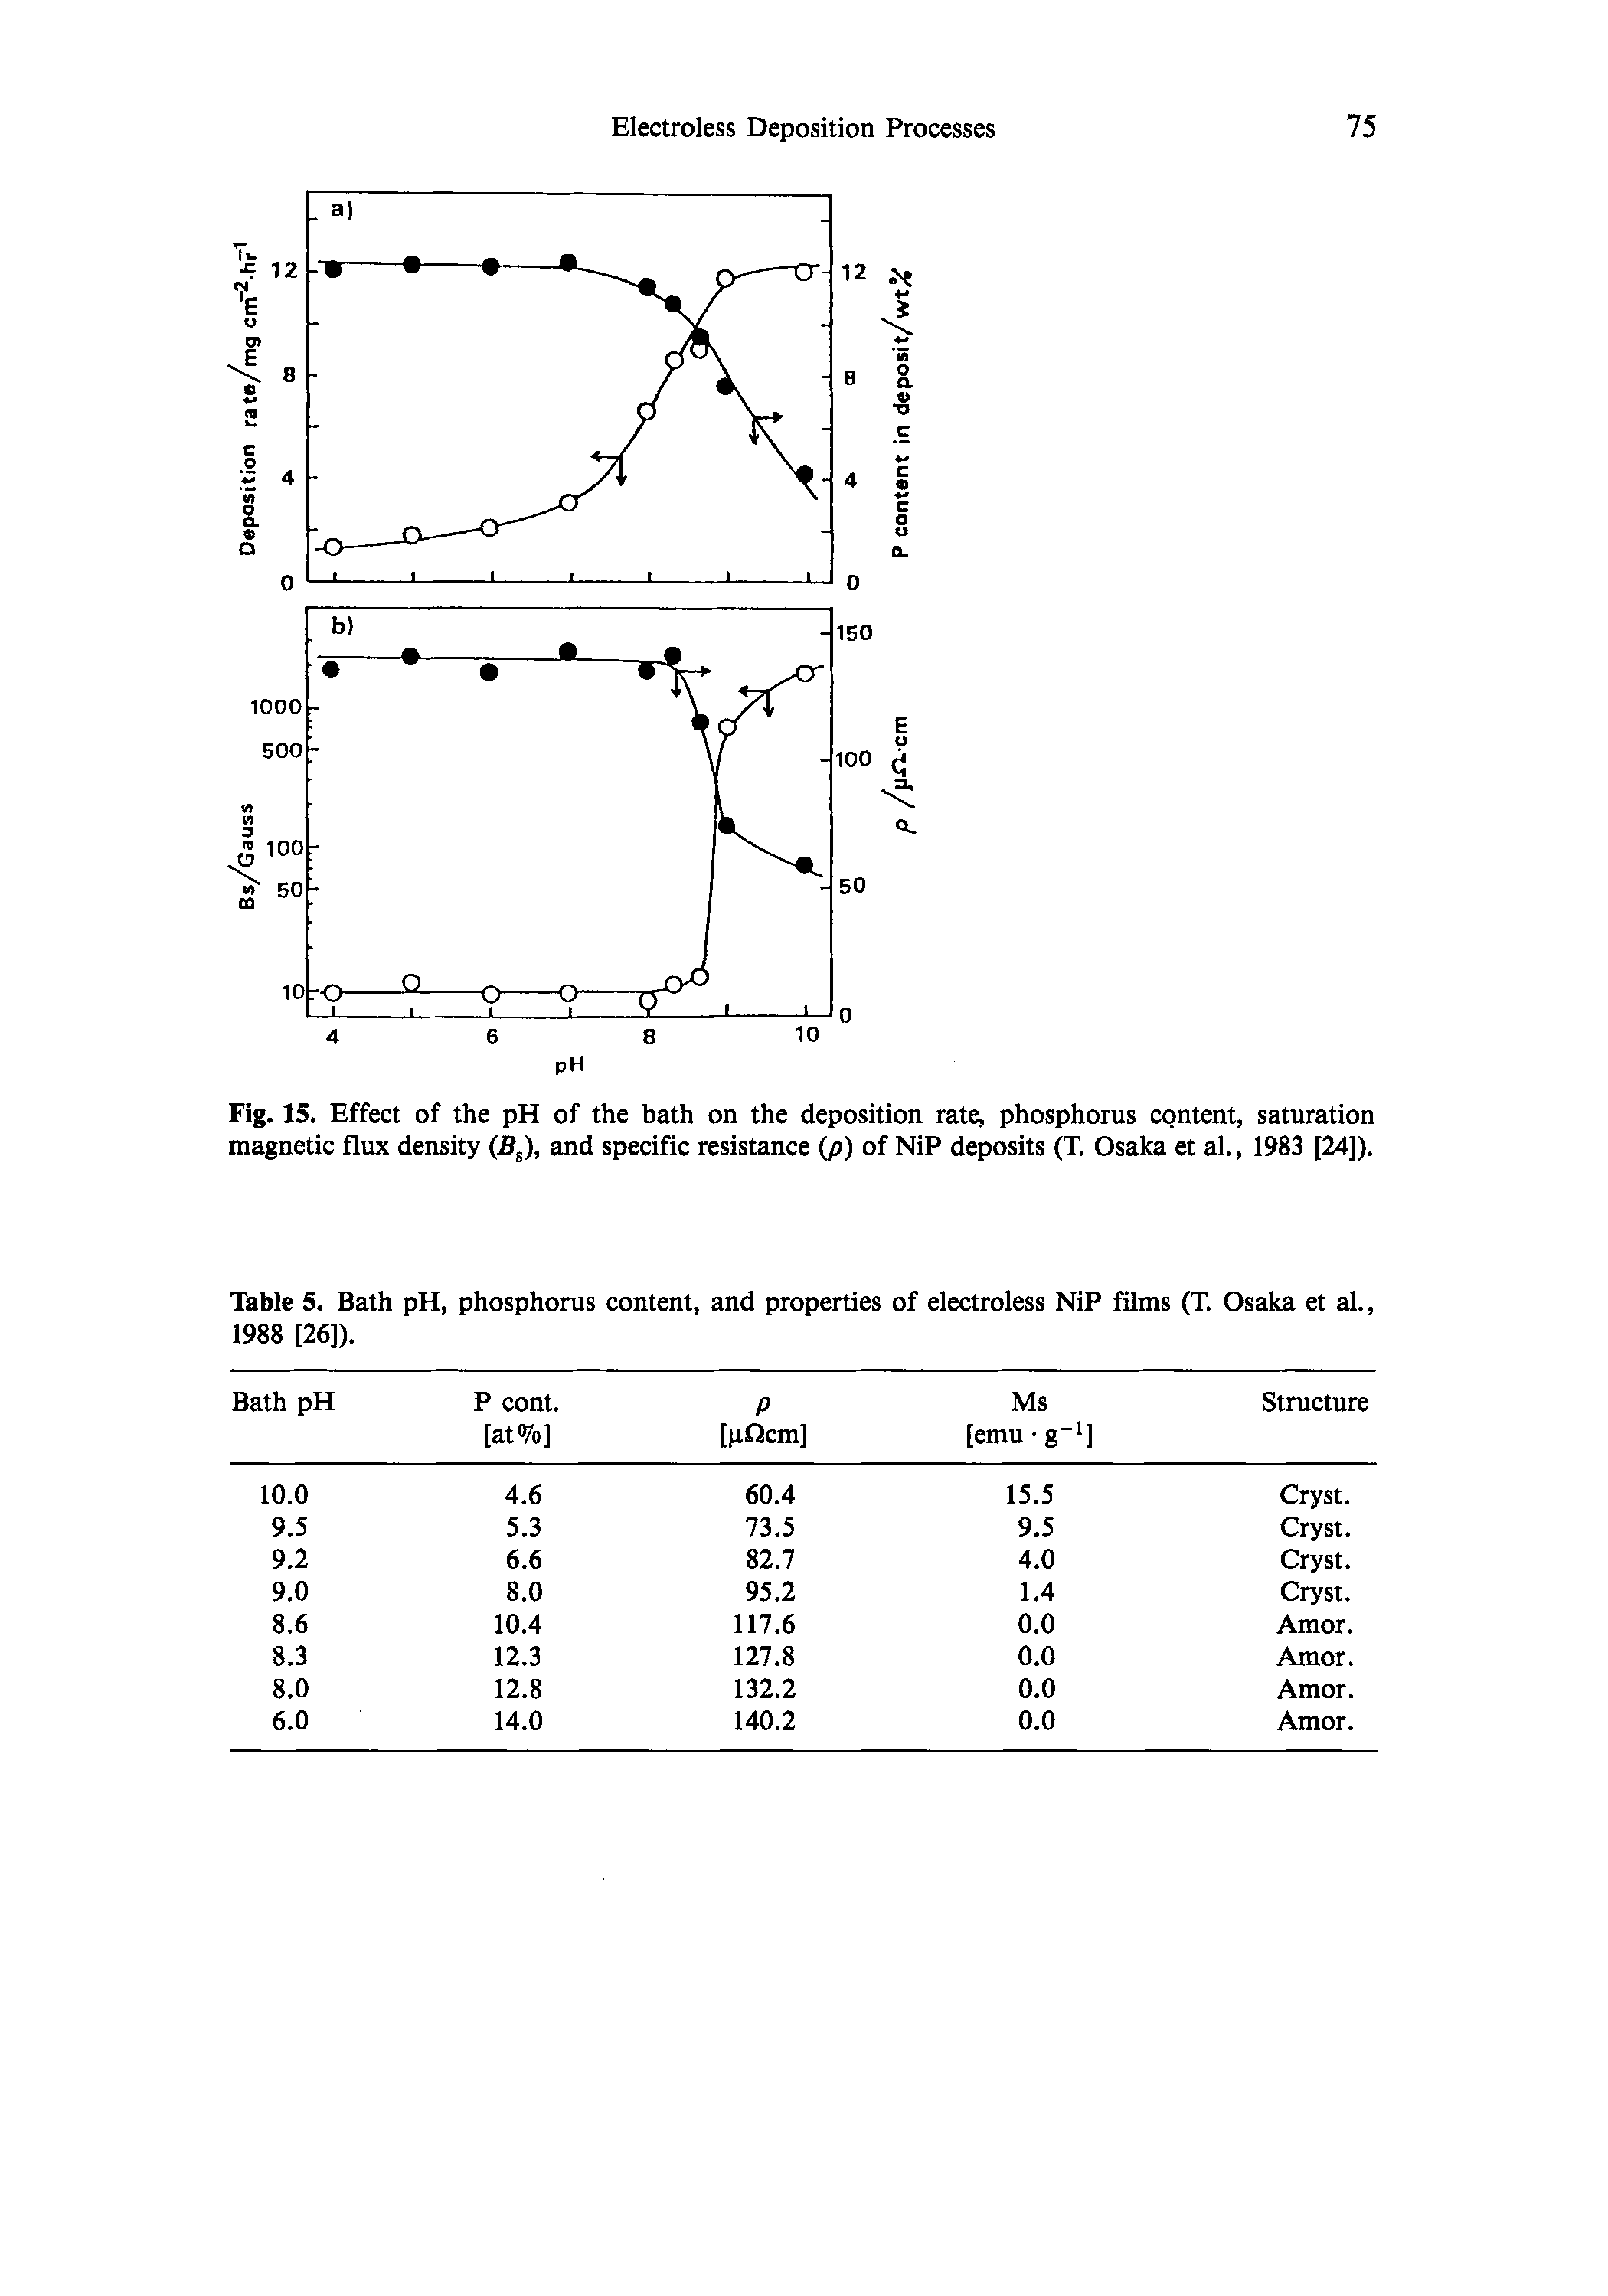 Fig. 15. Effect of the pH of the bath on the deposition rate, phosphorus content, saturation magnetic flux density (BJ, and specific resistance ip) of NiP deposits (T. Osaka et al., 1983 [24]).